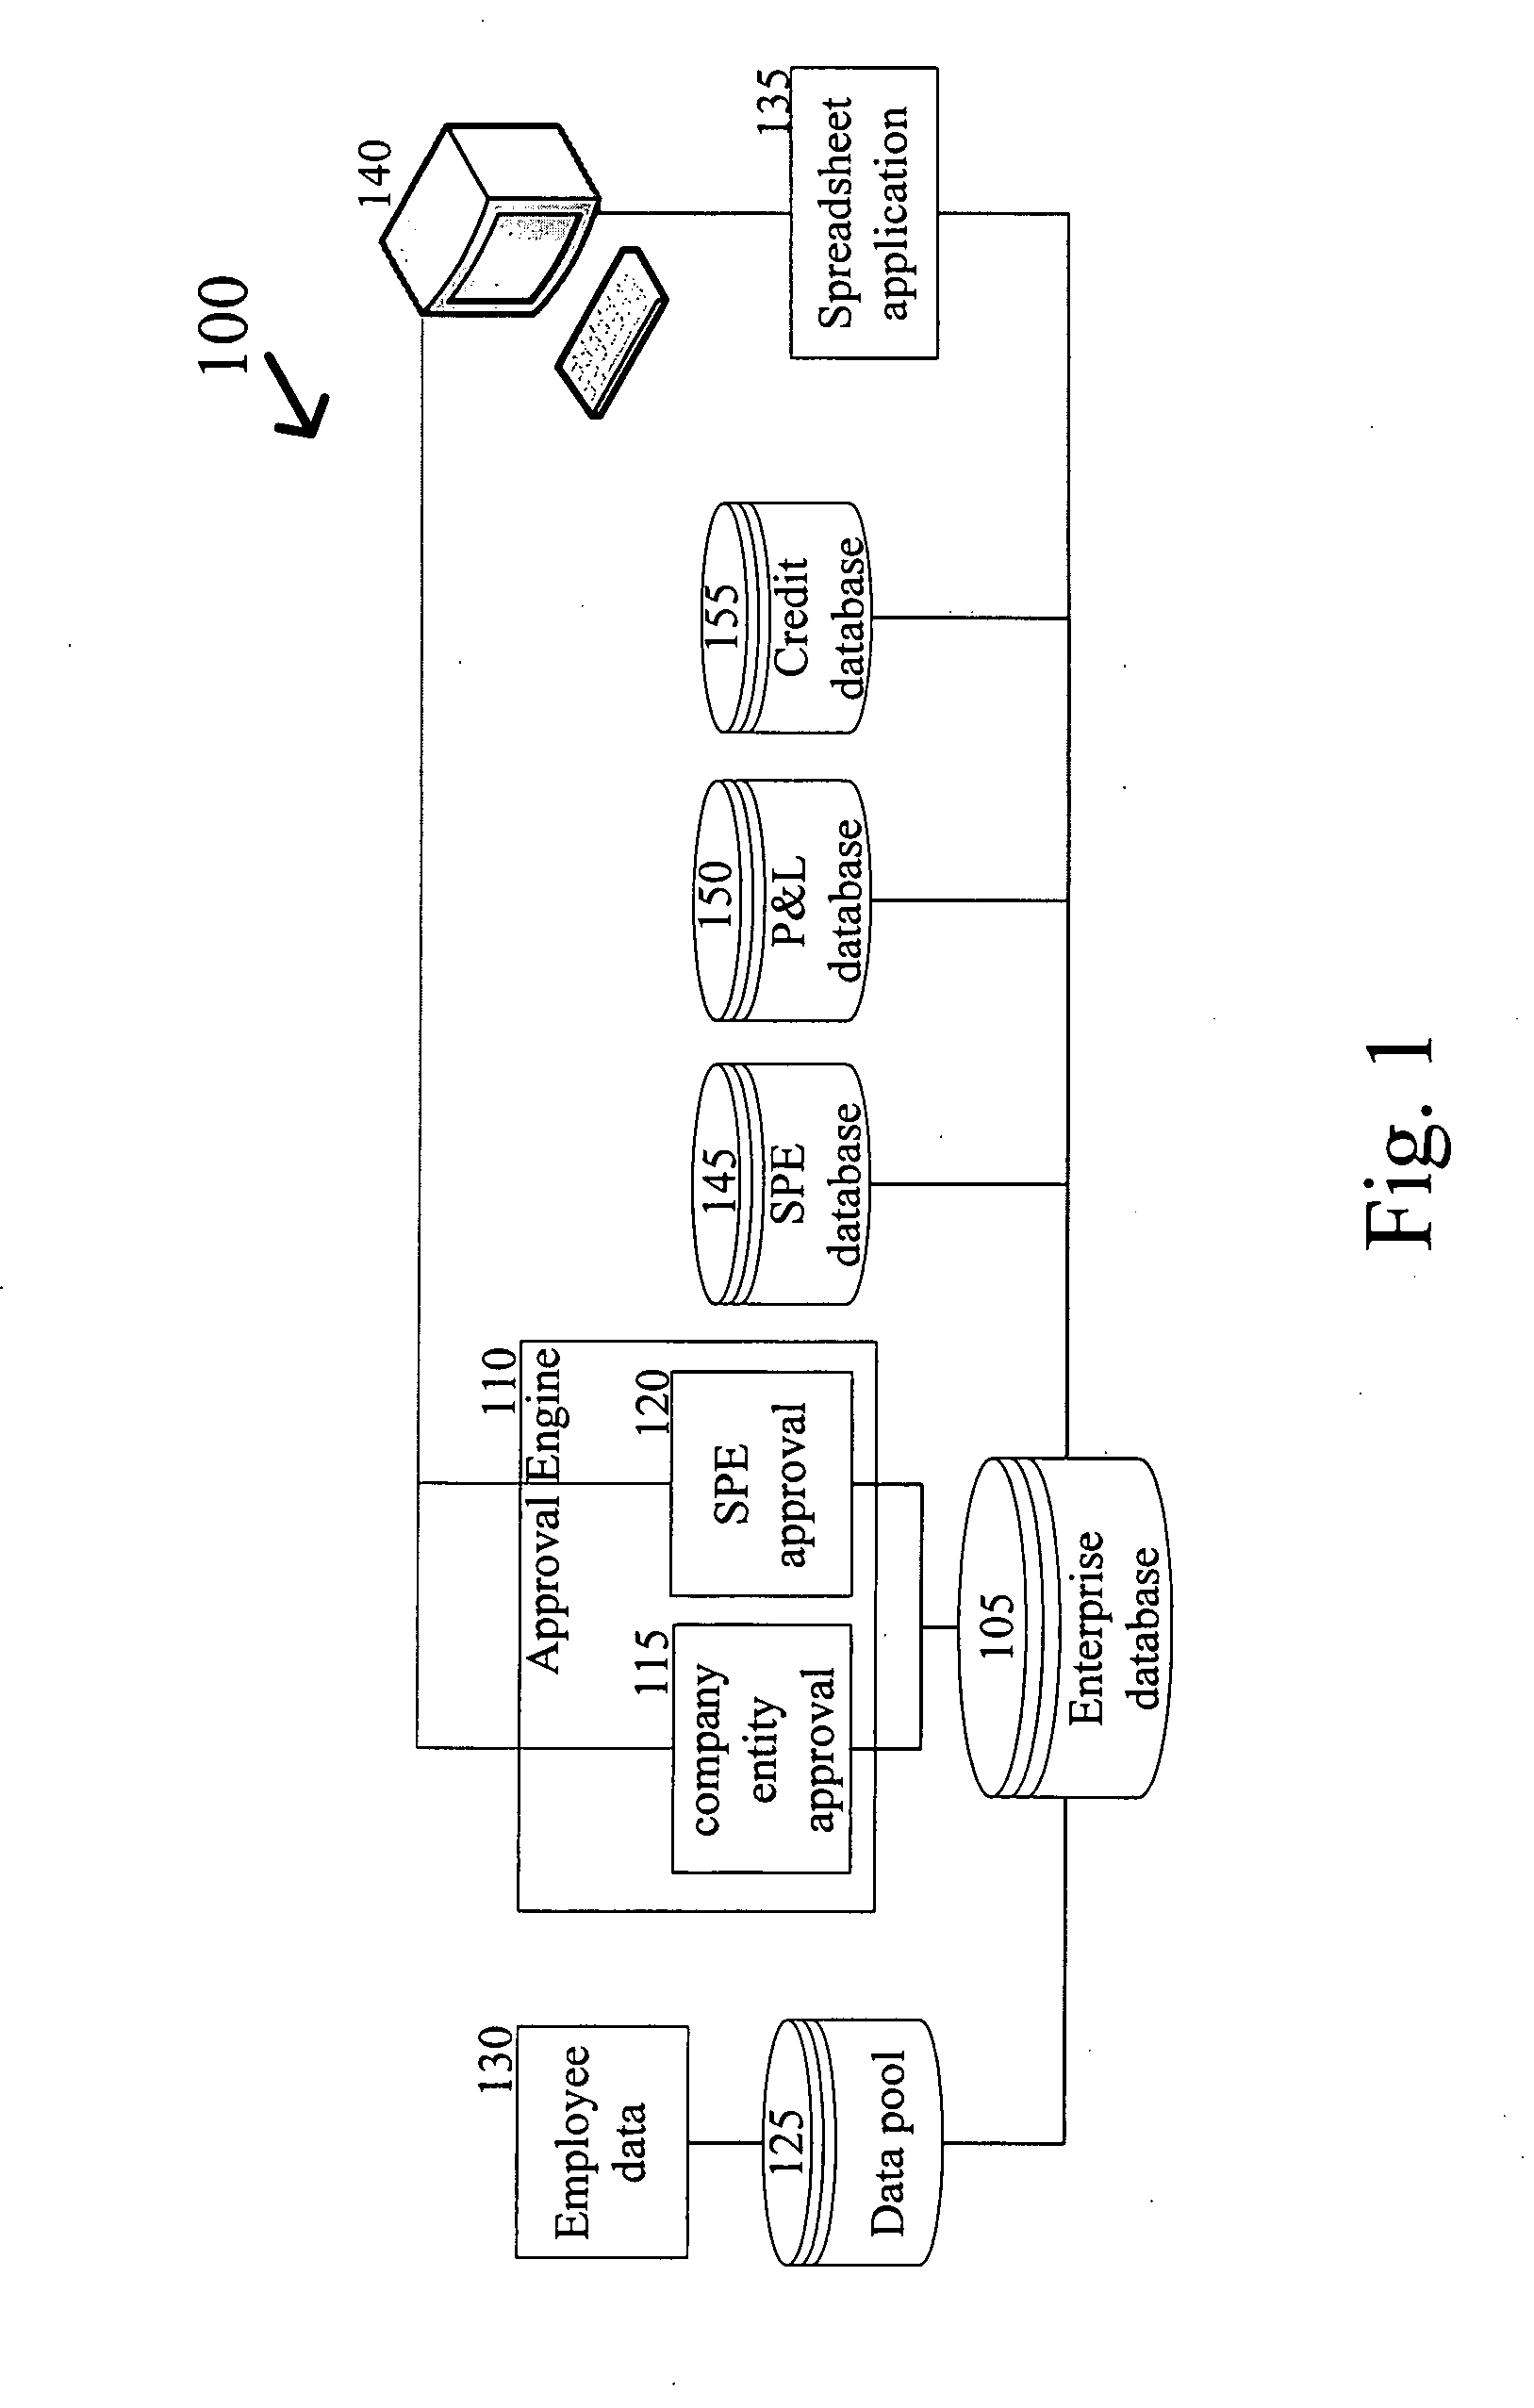 Method and system for generating an organizational display of entity relationships